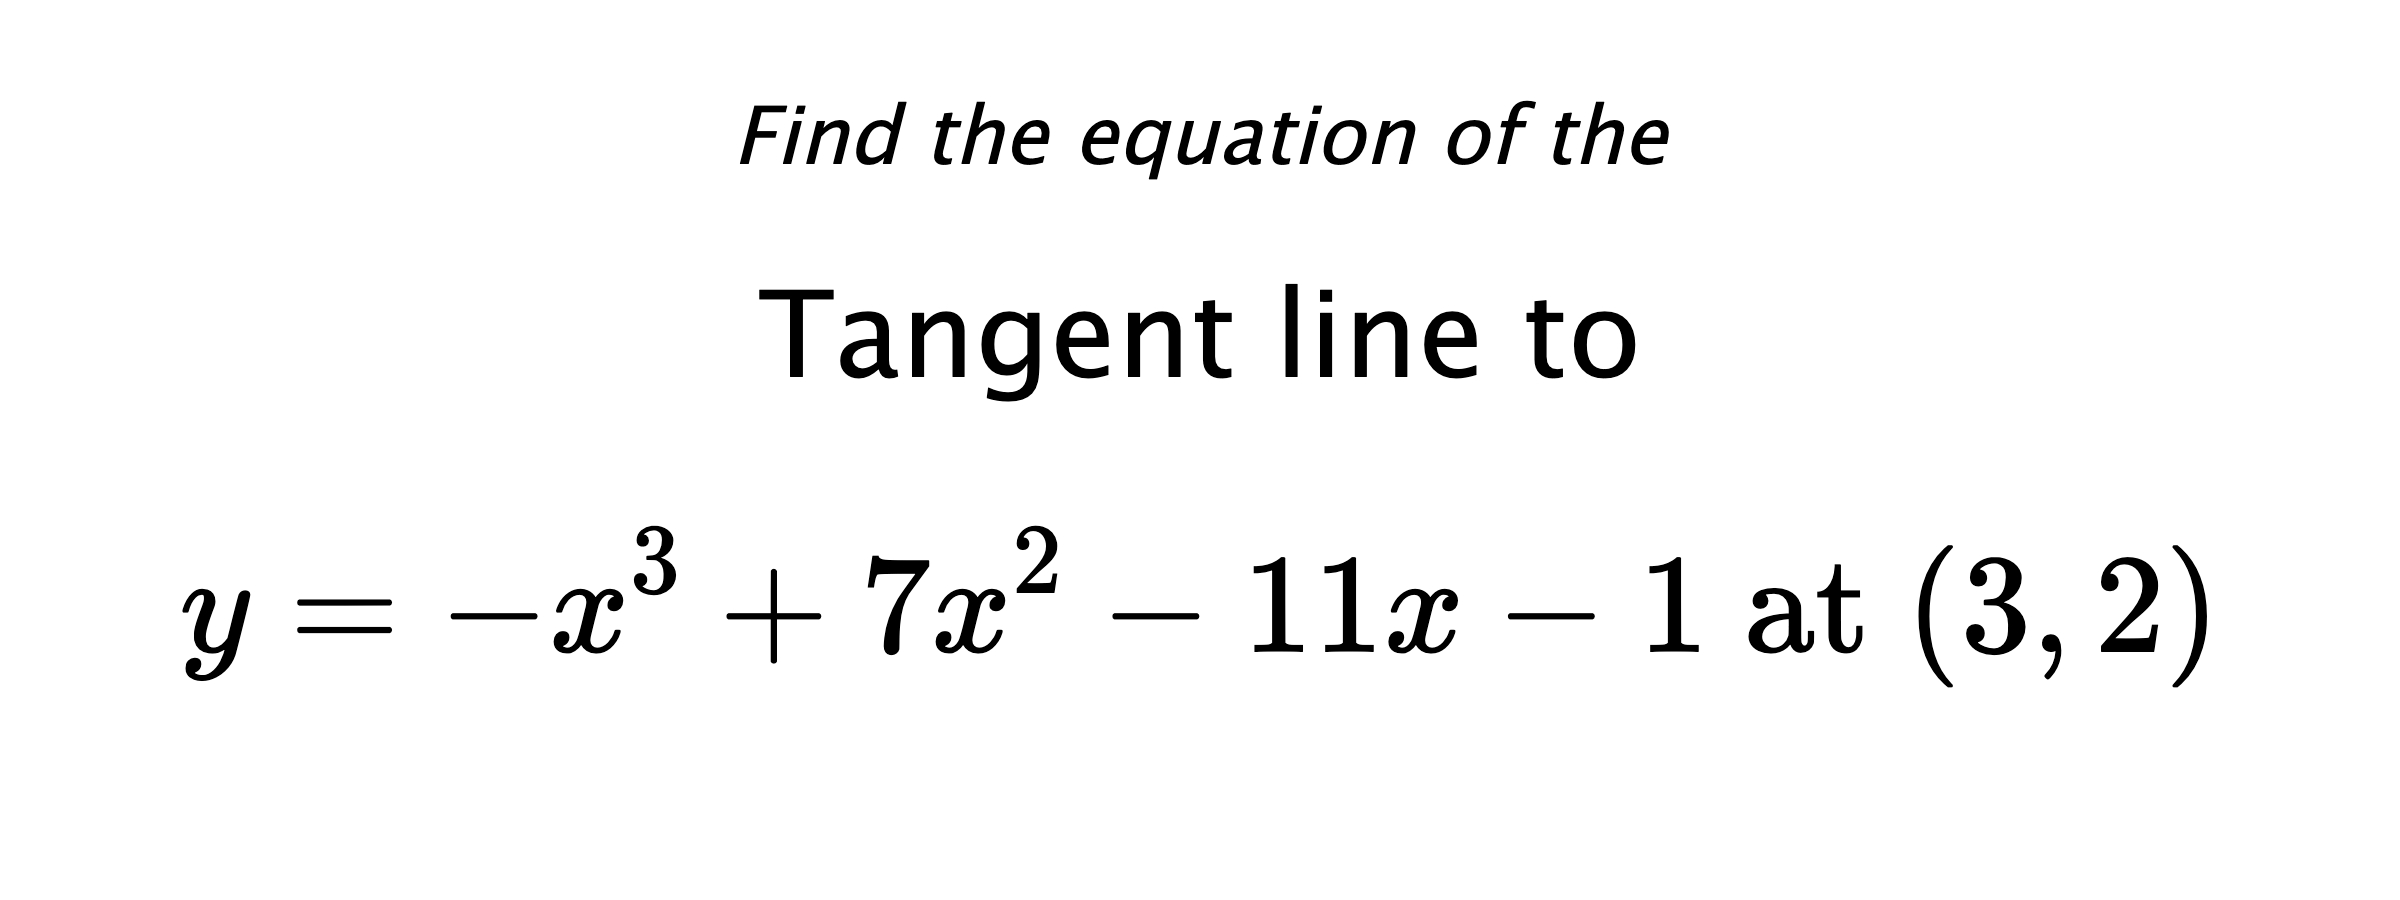 Find the equation of the Tangent line to $$ y=-x^3+7x^2-11x-1 \text{ at } (3,2) $$